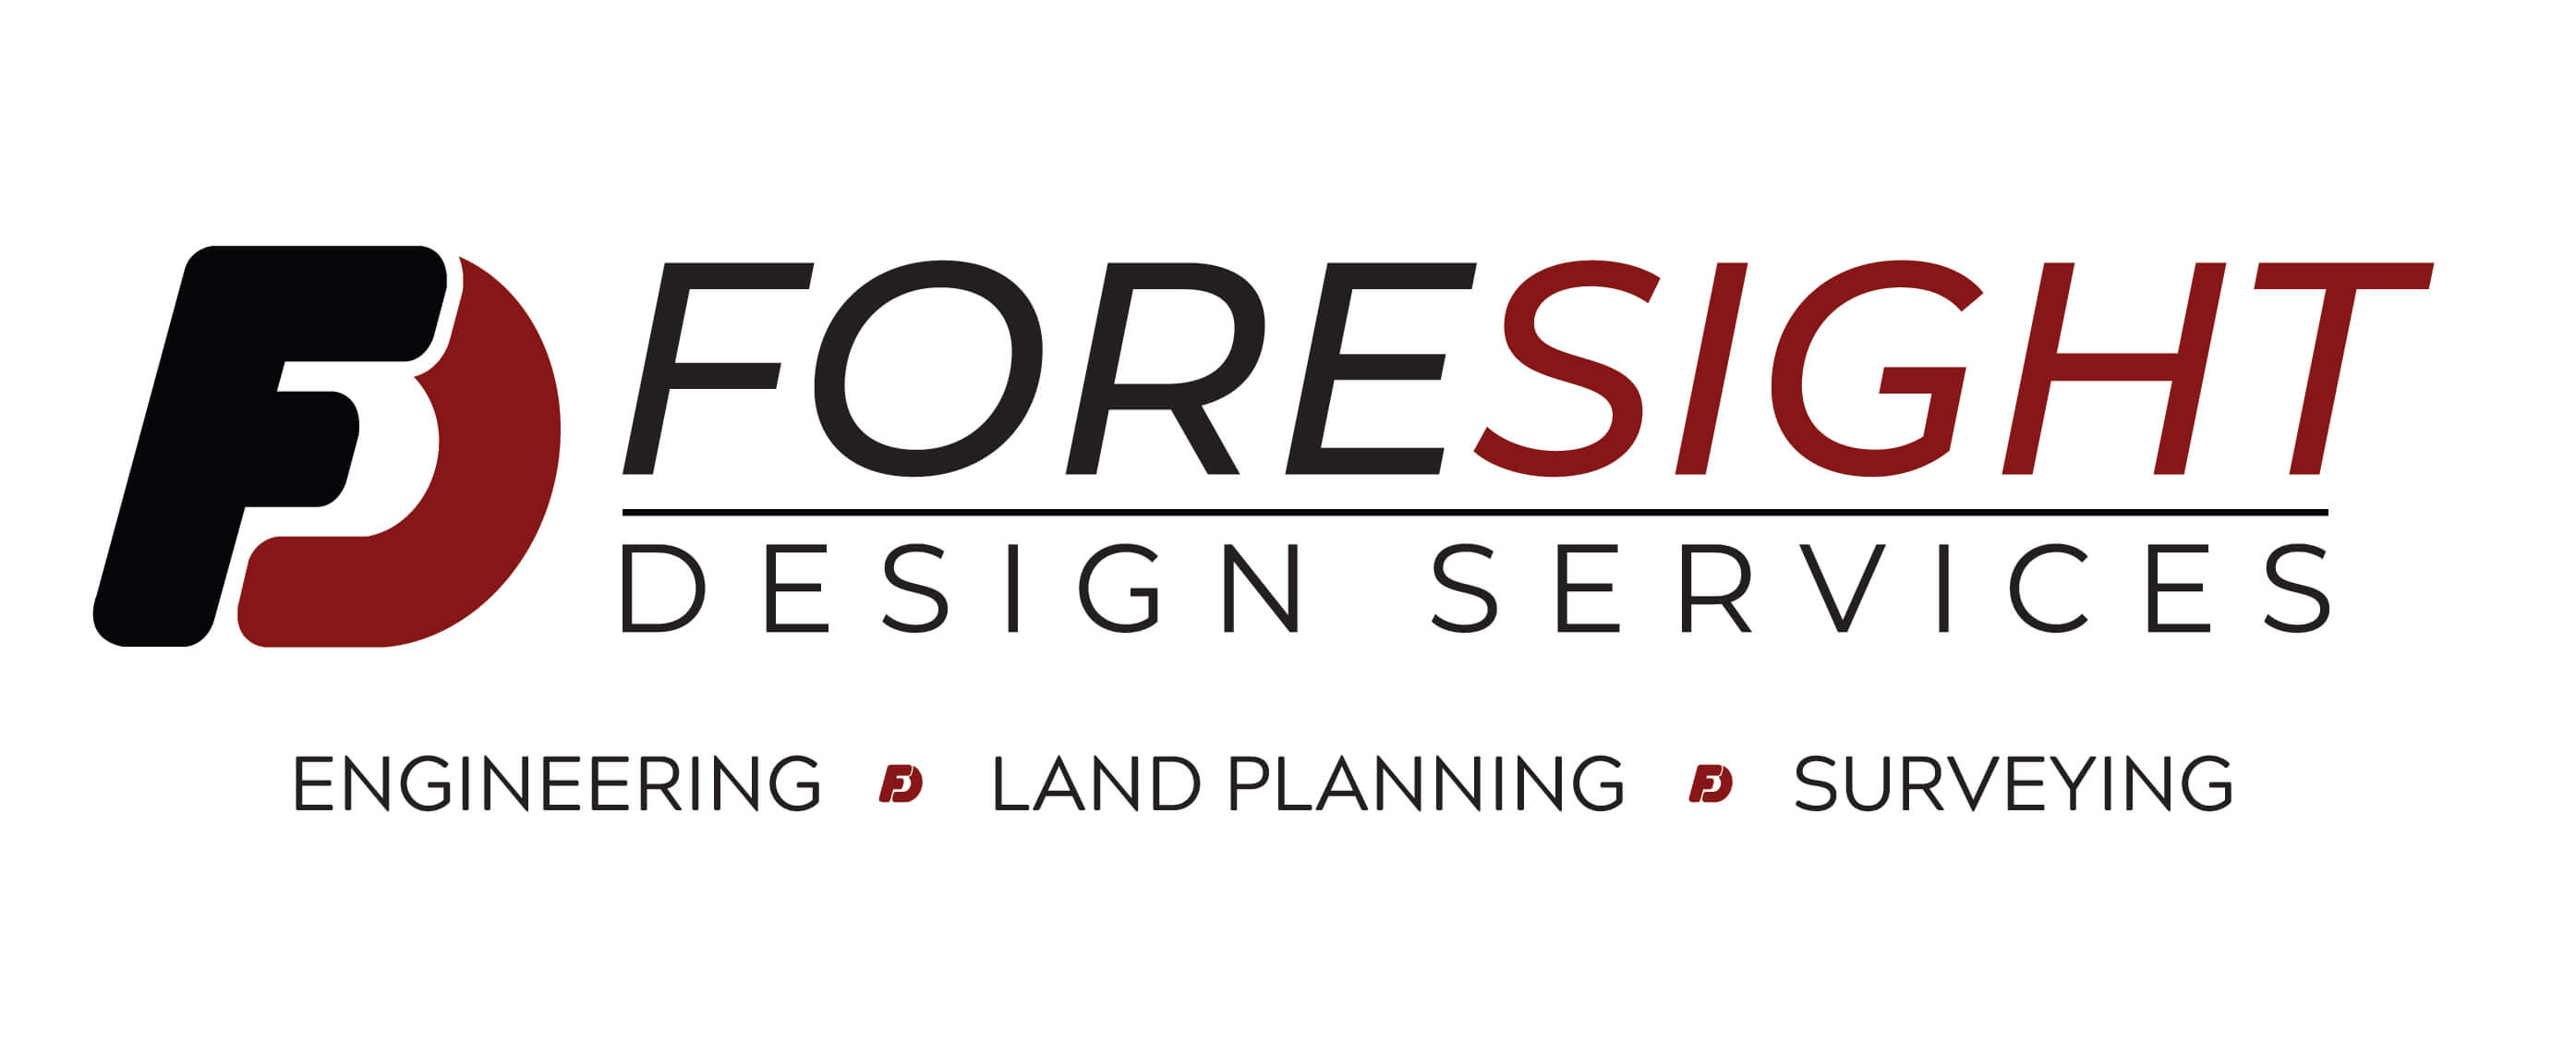 Foresight Design Services